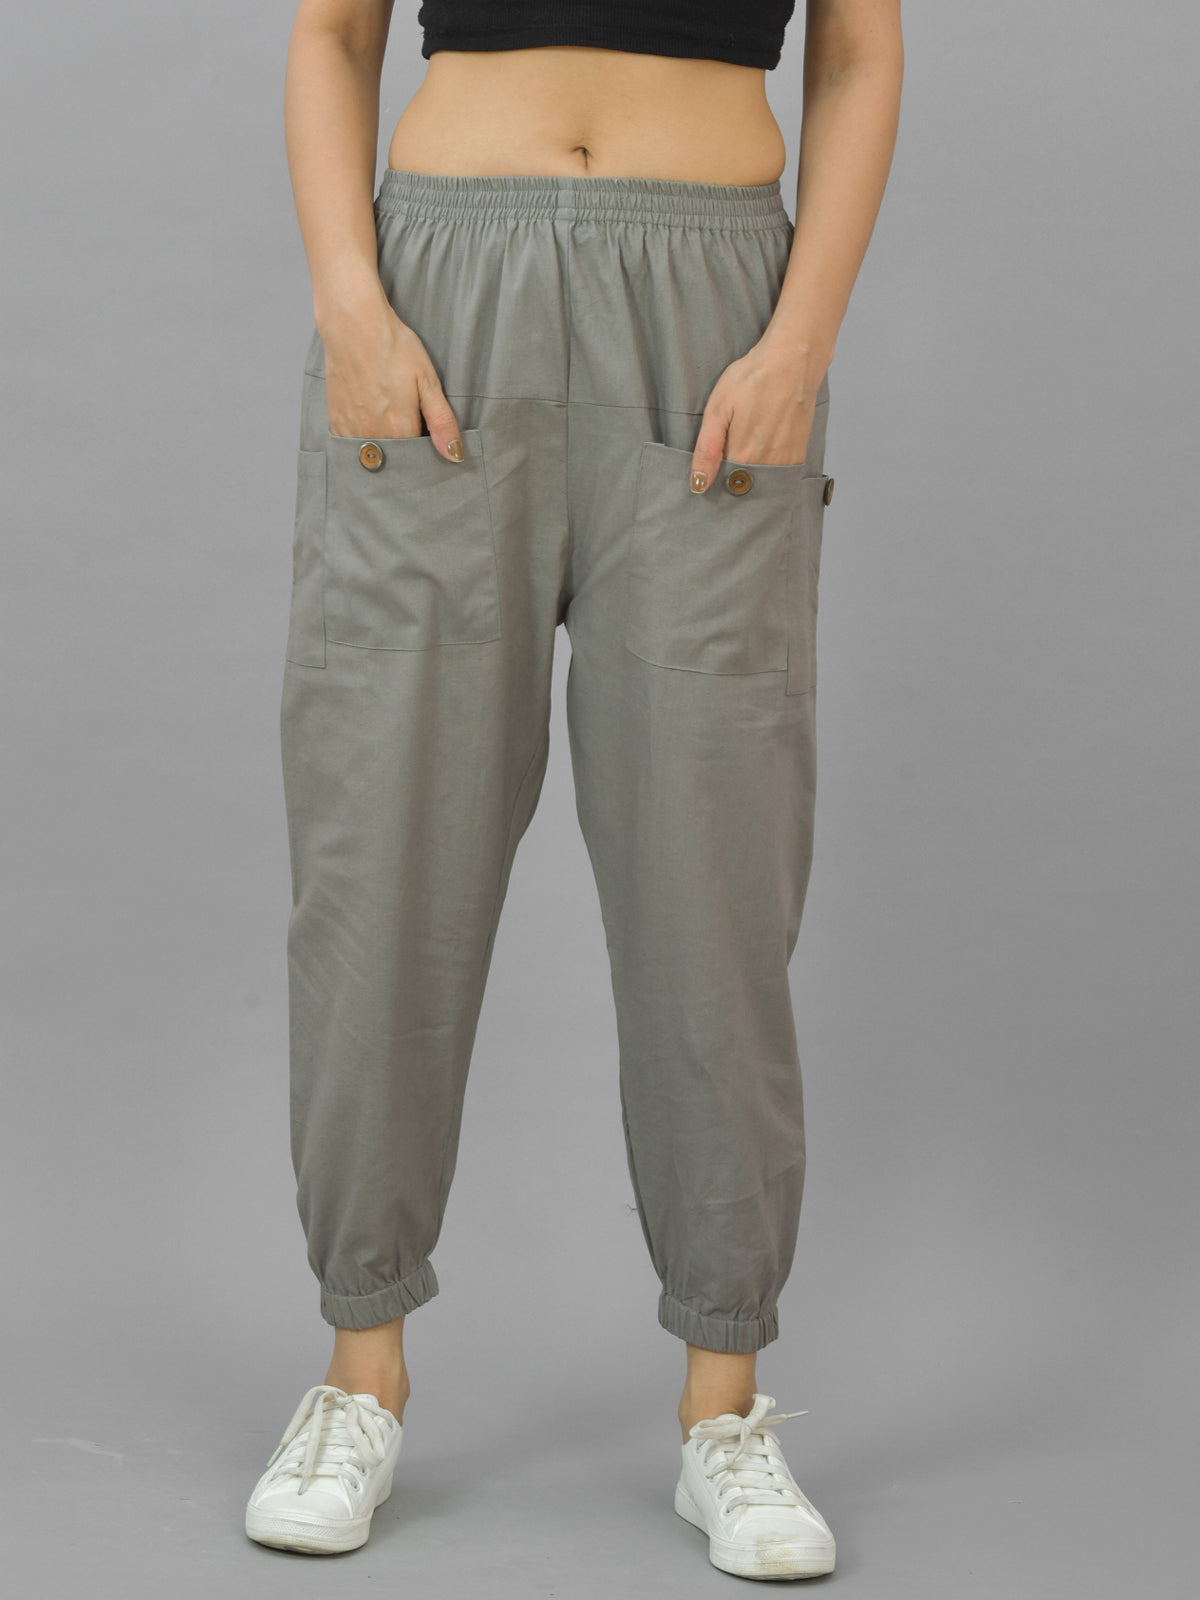 Combo Pack Of Womens Grey And Maroon Four Pocket Cotton Cargo Pants